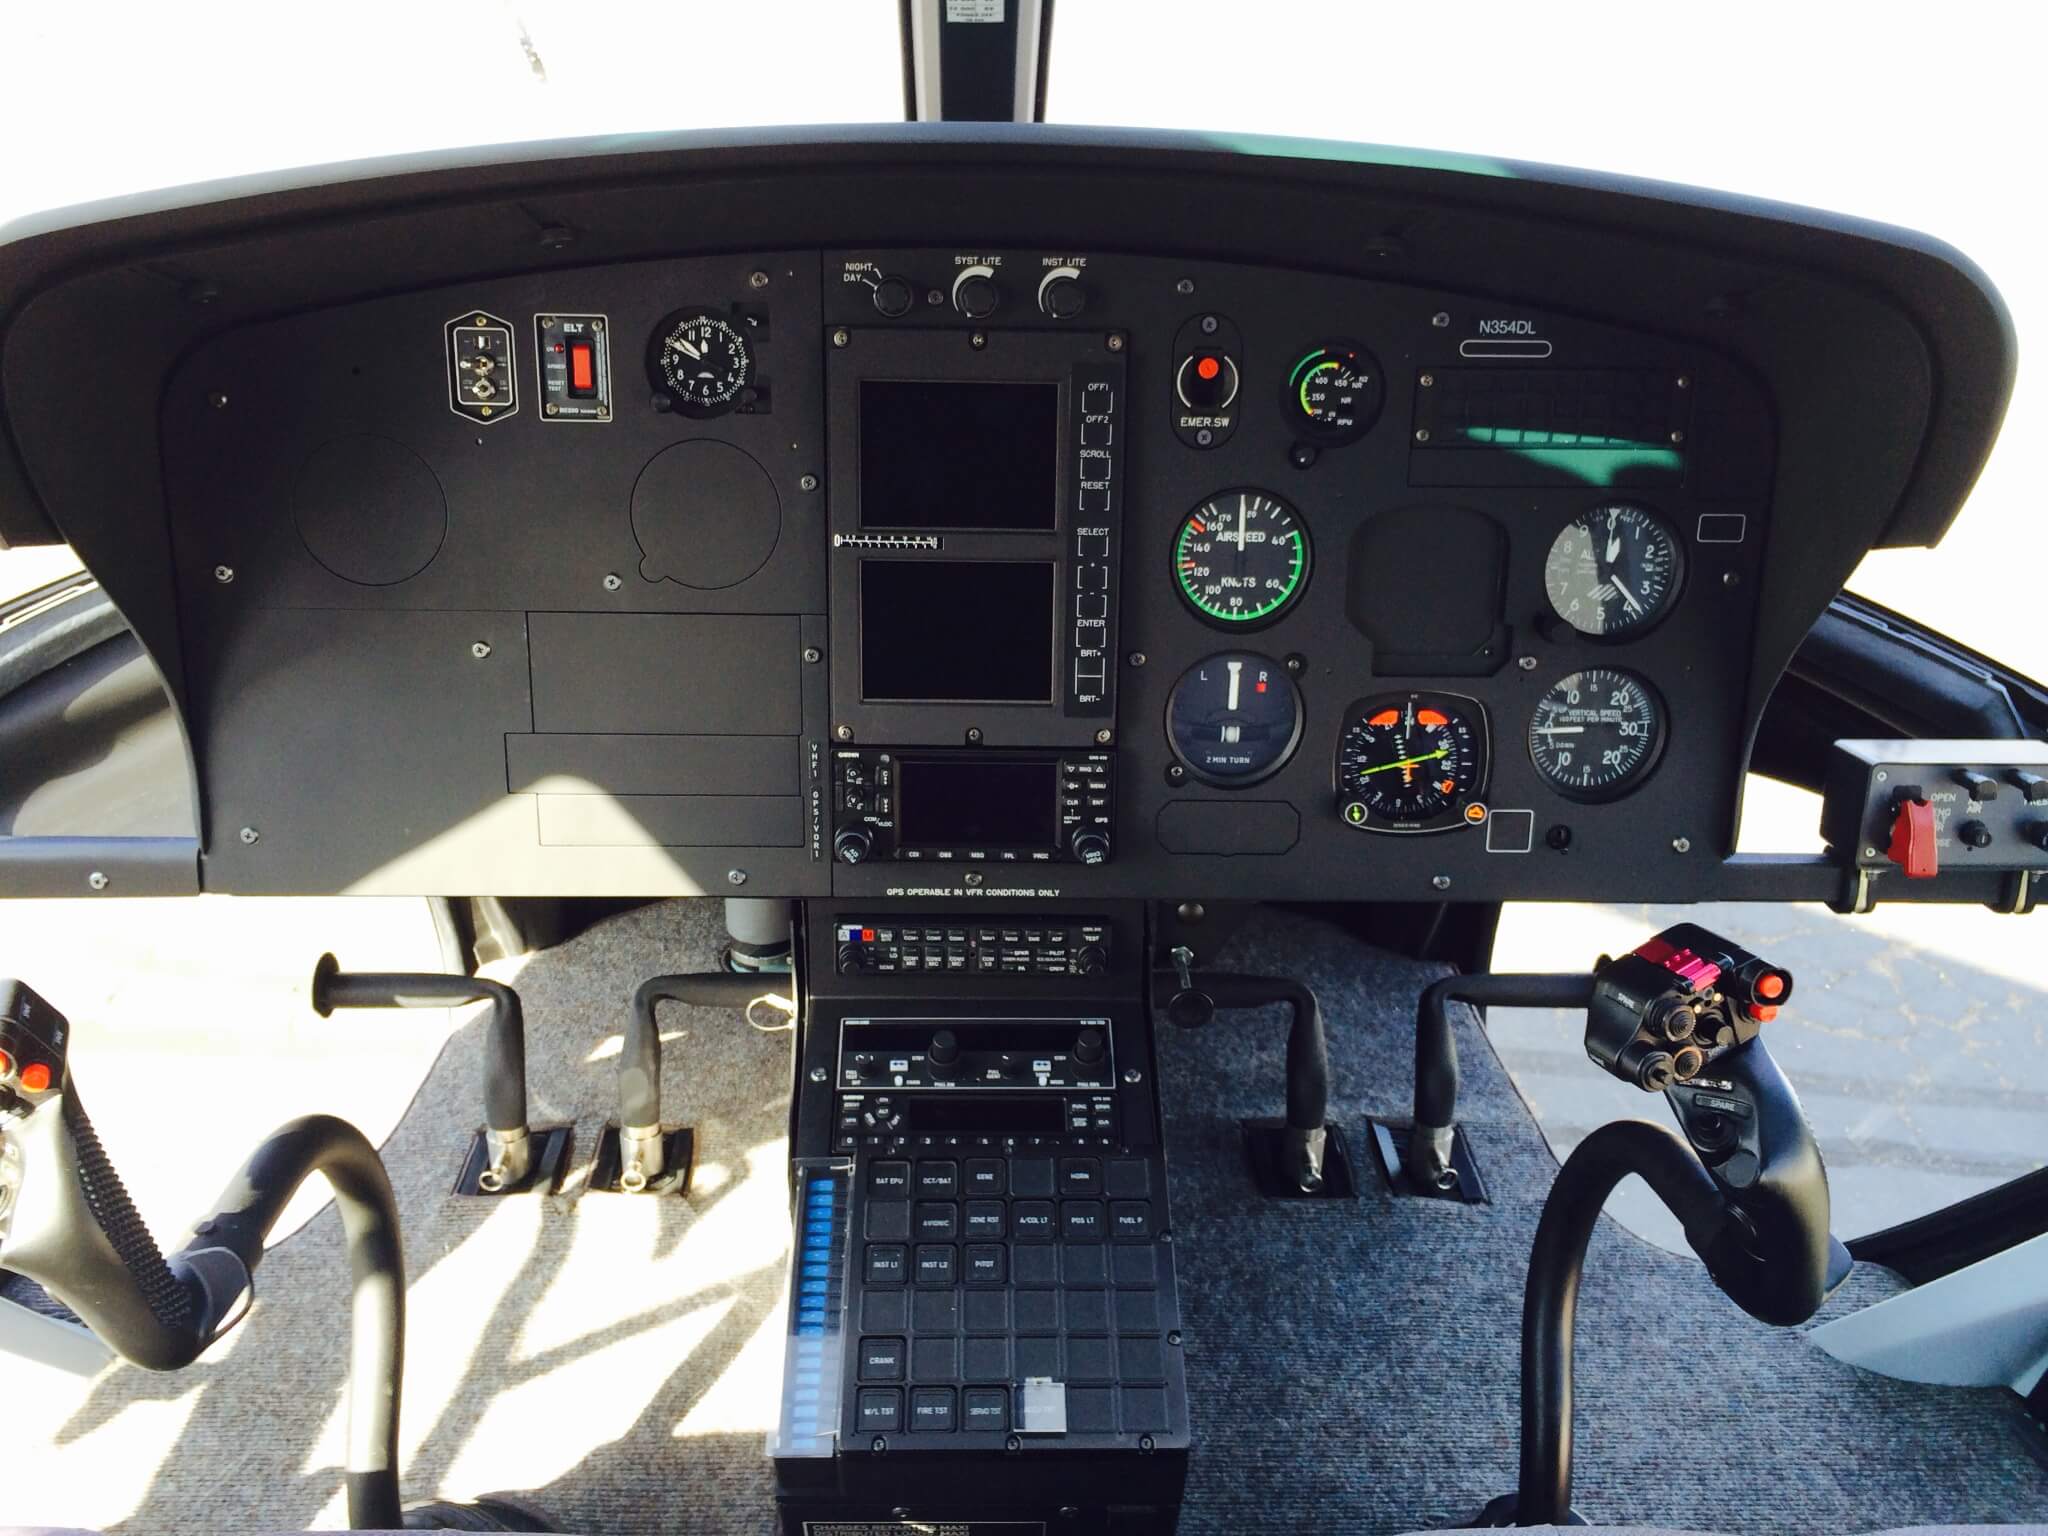 Panel of a 2012 Eurocopter AS350 B3 helicopter